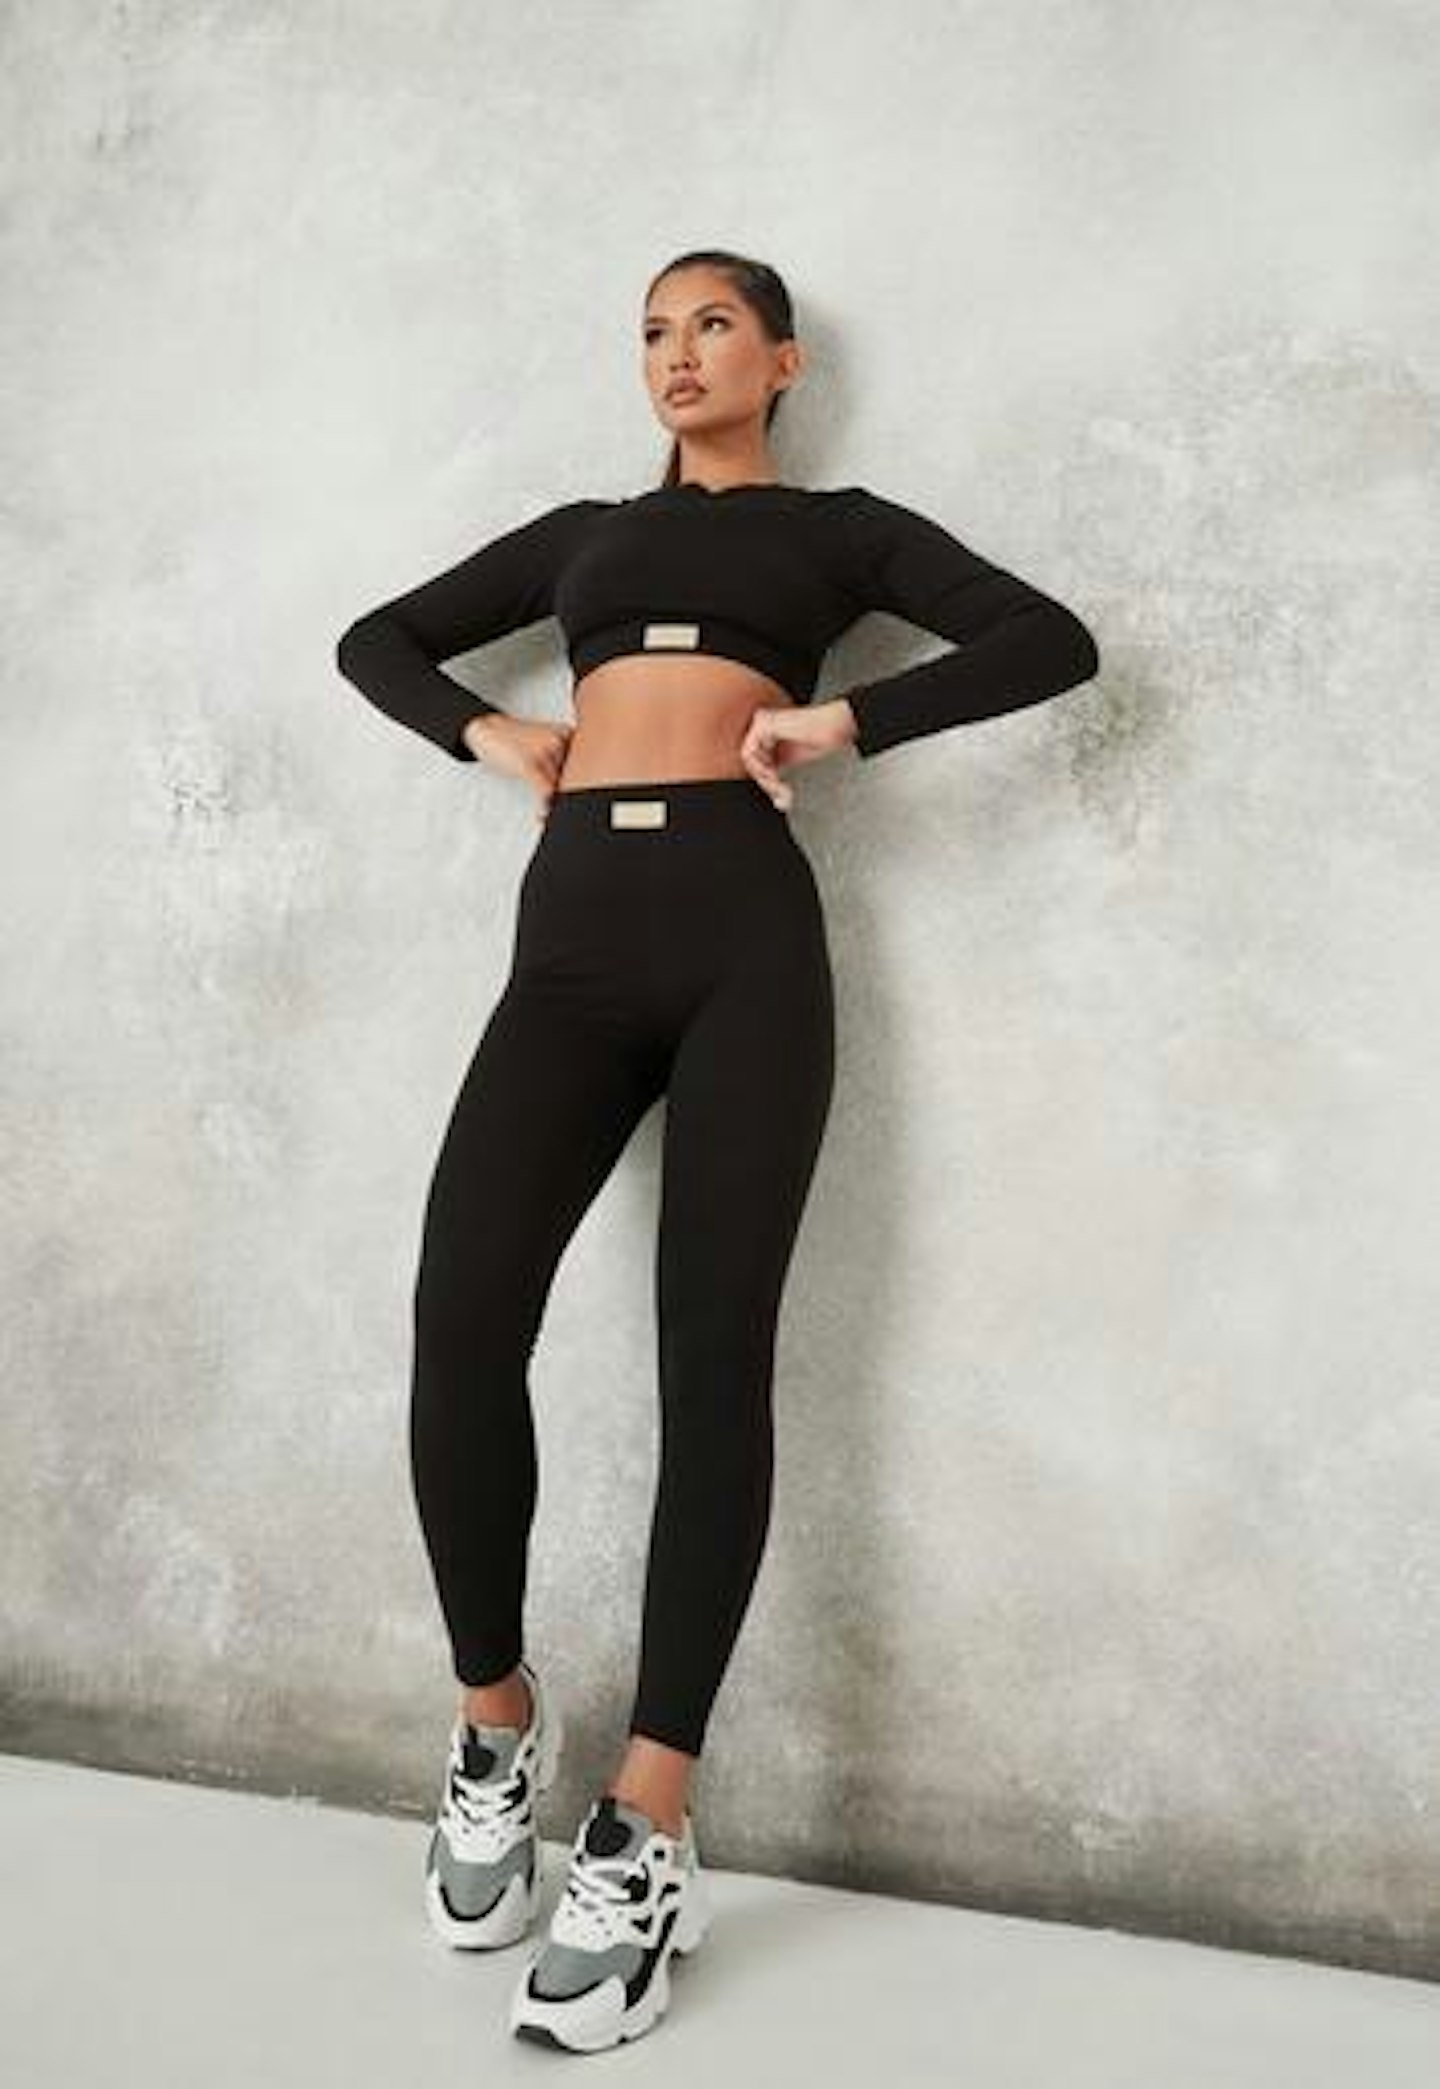 Missguided launch petite activewear and here are our top picks